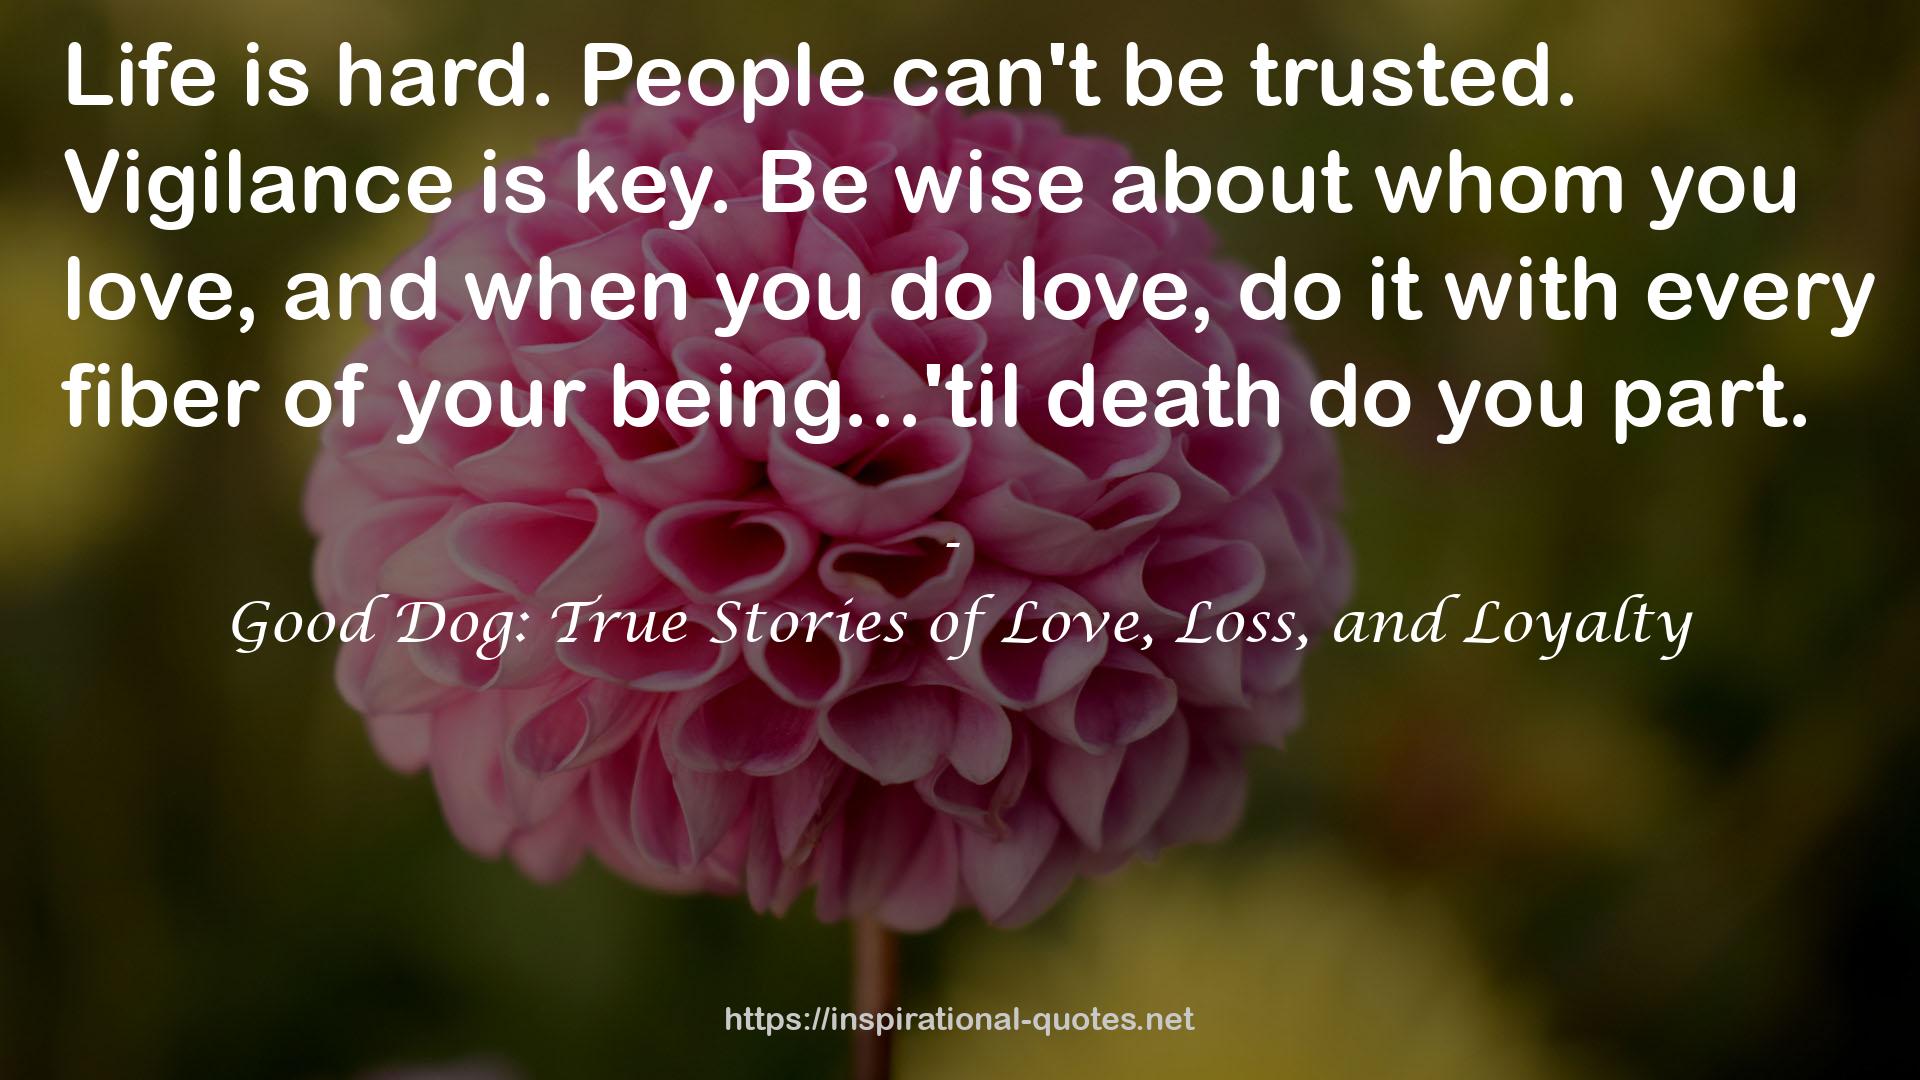 Good Dog: True Stories of Love, Loss, and Loyalty QUOTES